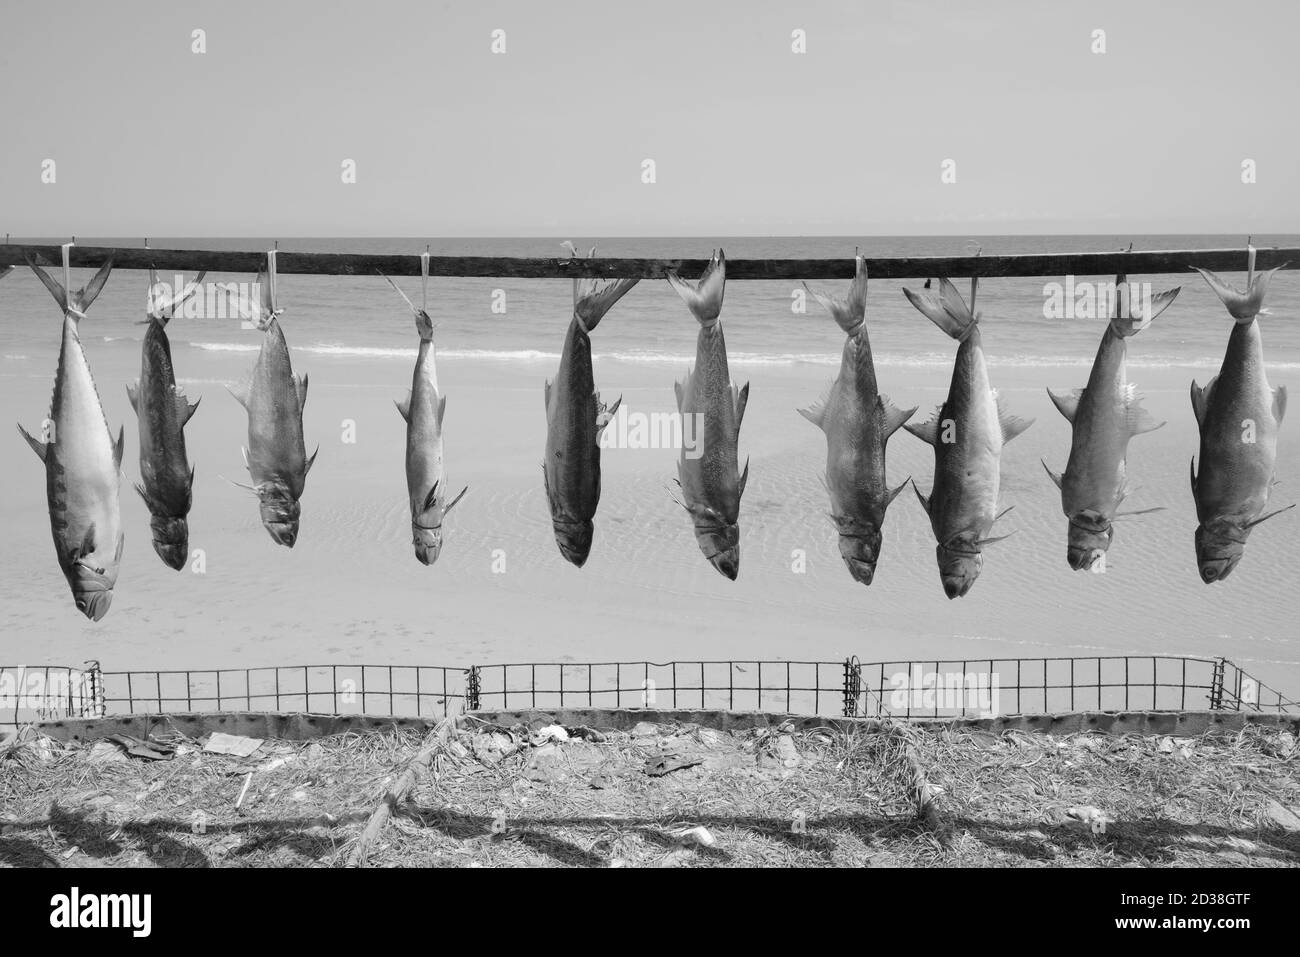 Picture of freshly caught fishes tied up and hanged to dry for preservation near the coast of the beach Stock Photo